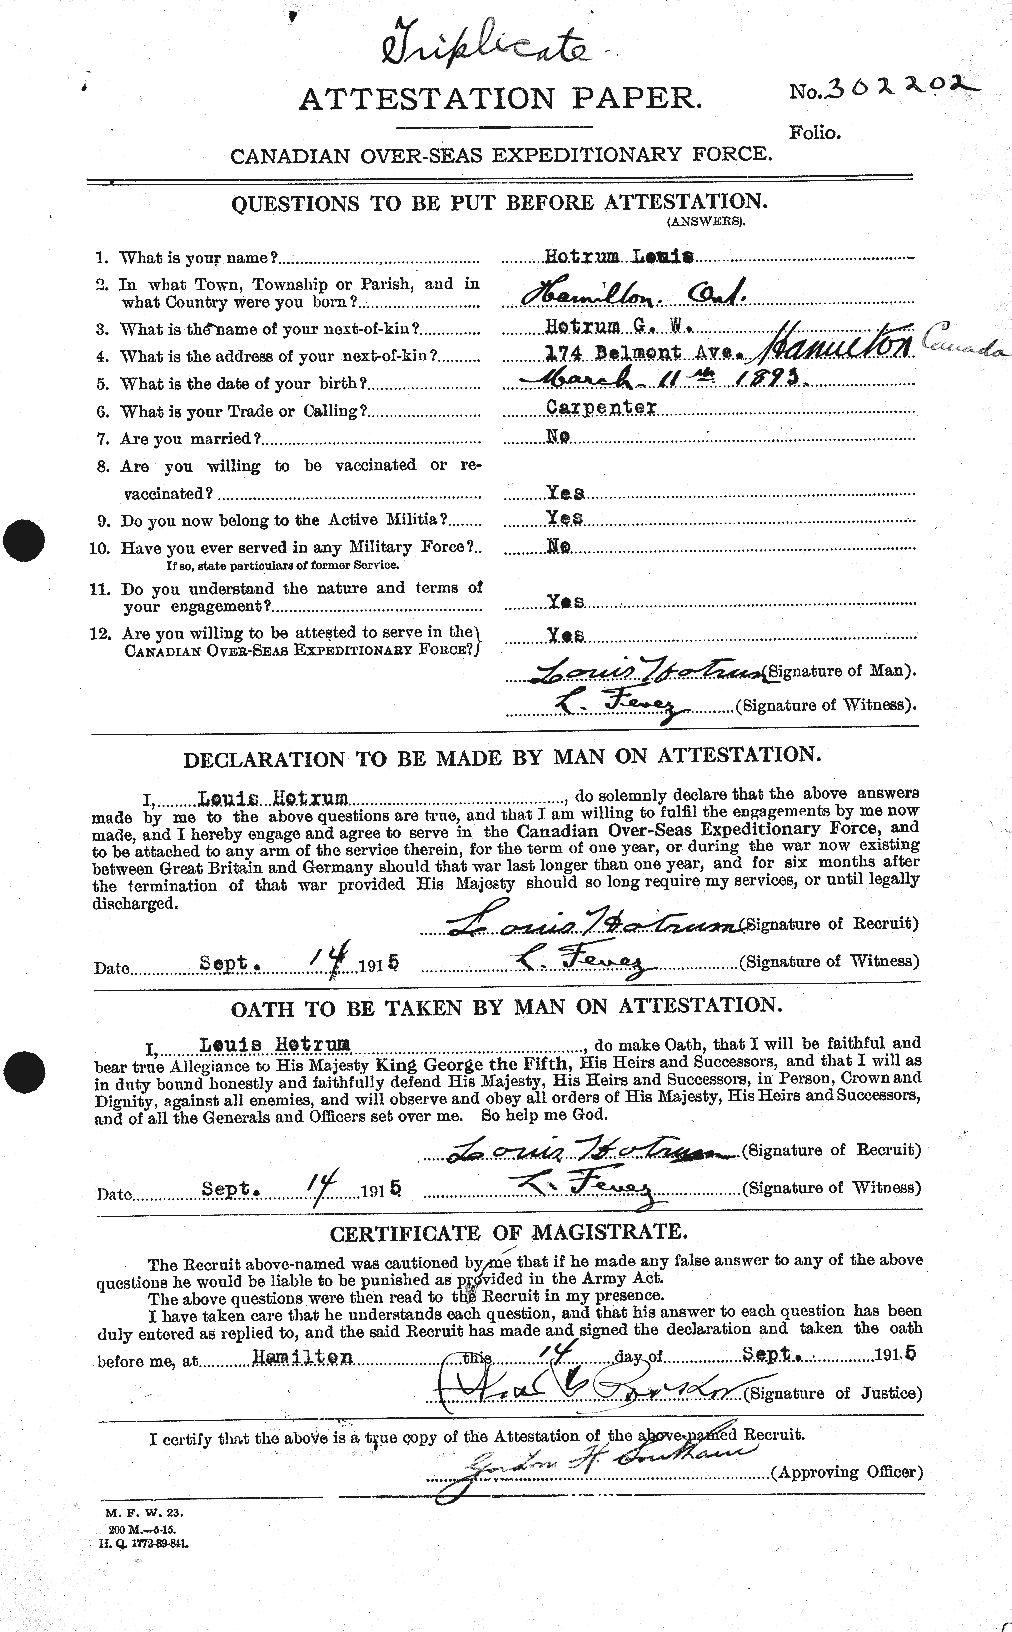 Personnel Records of the First World War - CEF 401172a